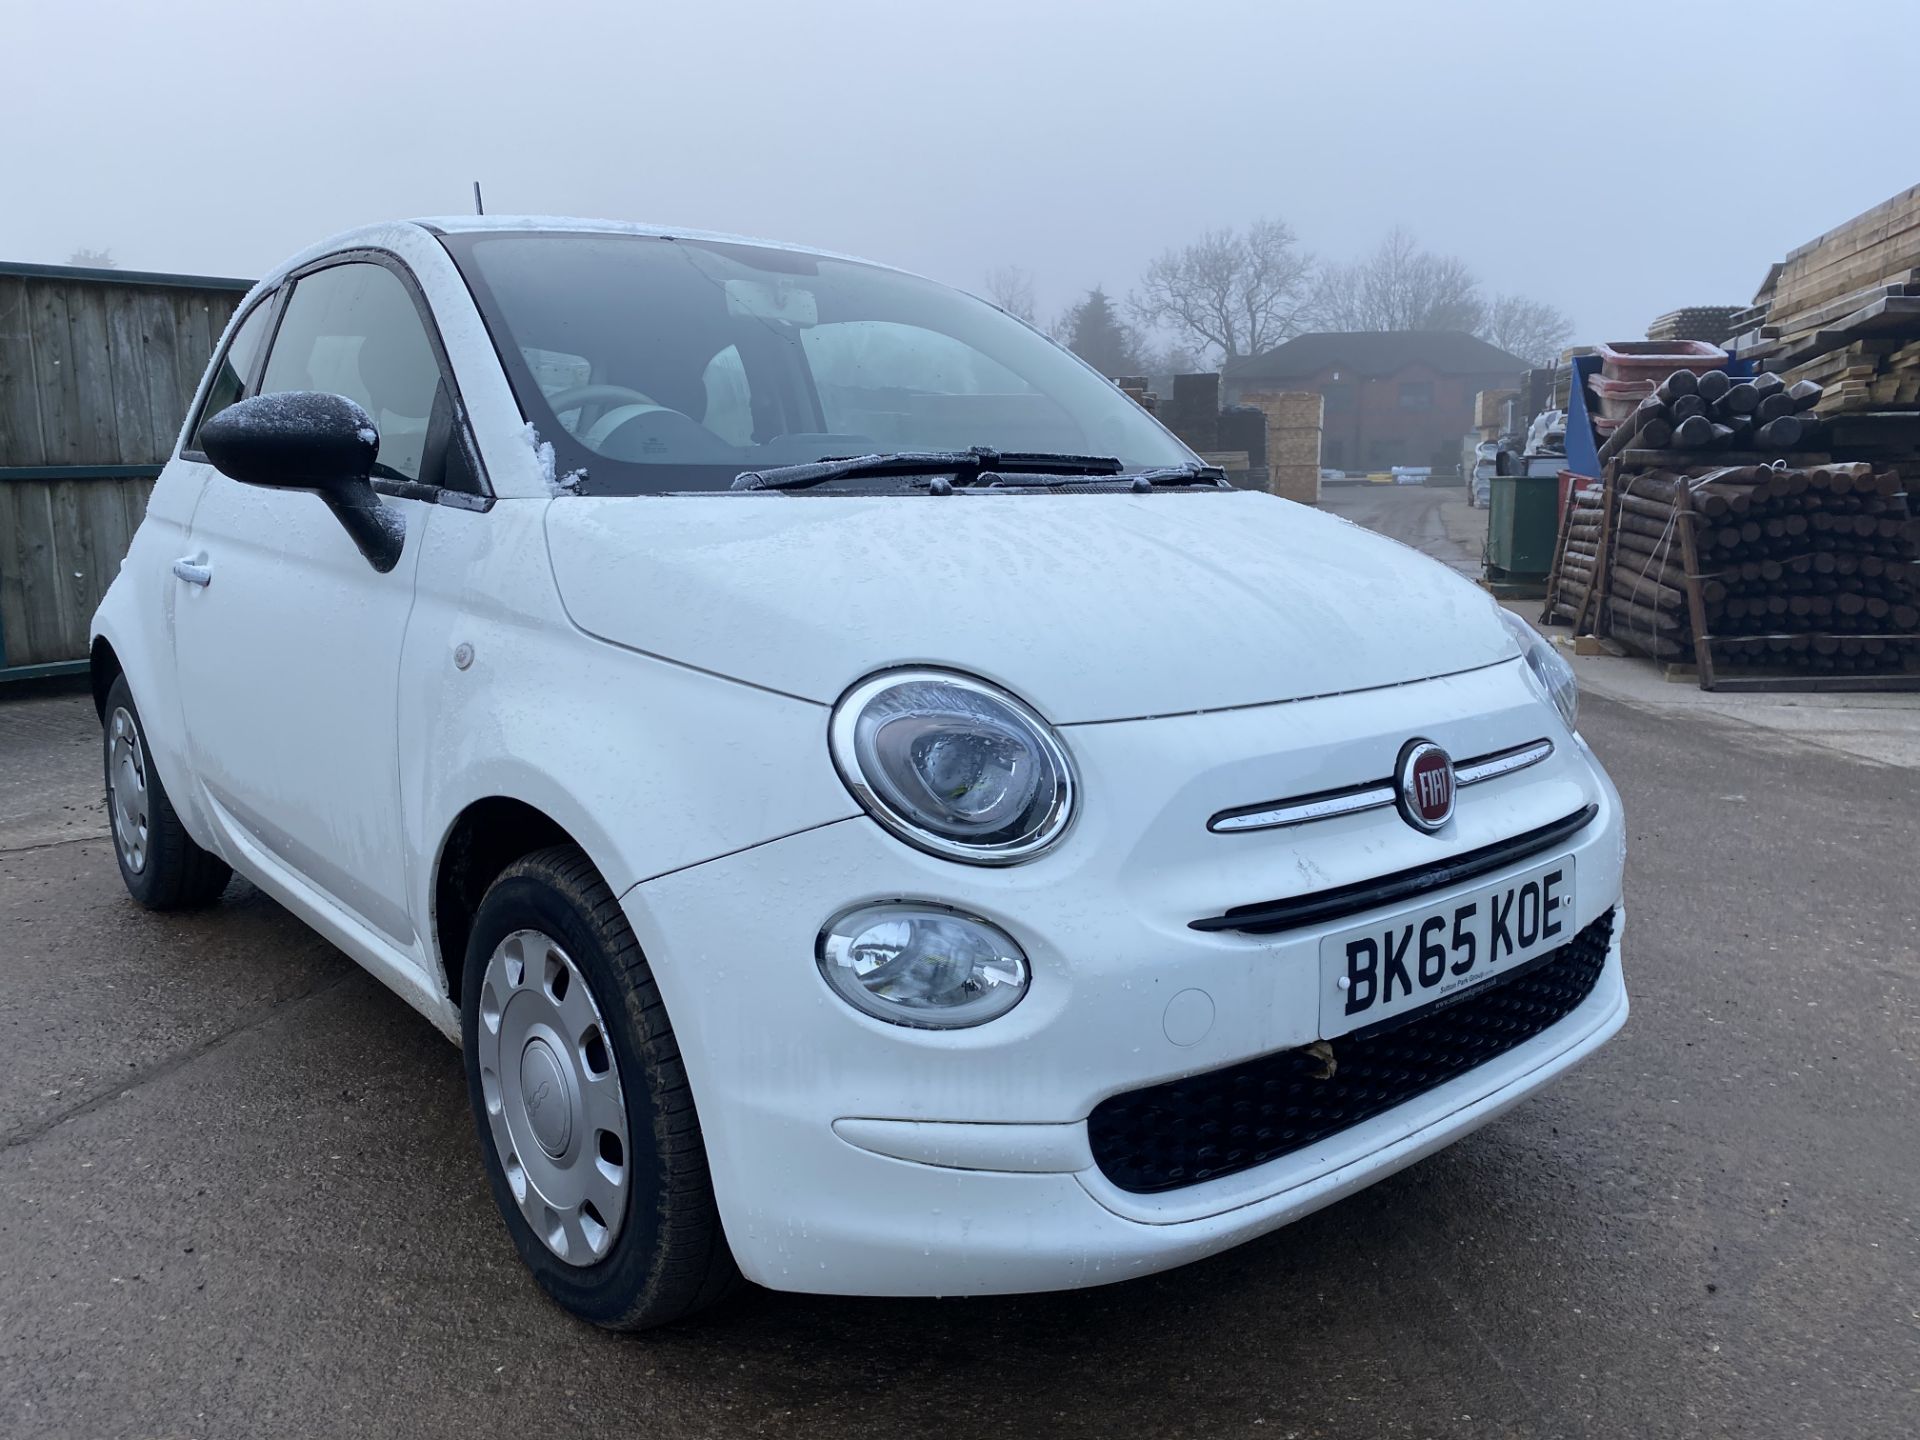 On Sale FIAT 500 "POP" 1.2 PETROL - 2016 MODEL - 1 KEEPER - ONLY 44K MILES FROM NEW - AIR CON - LOOK - Image 2 of 18